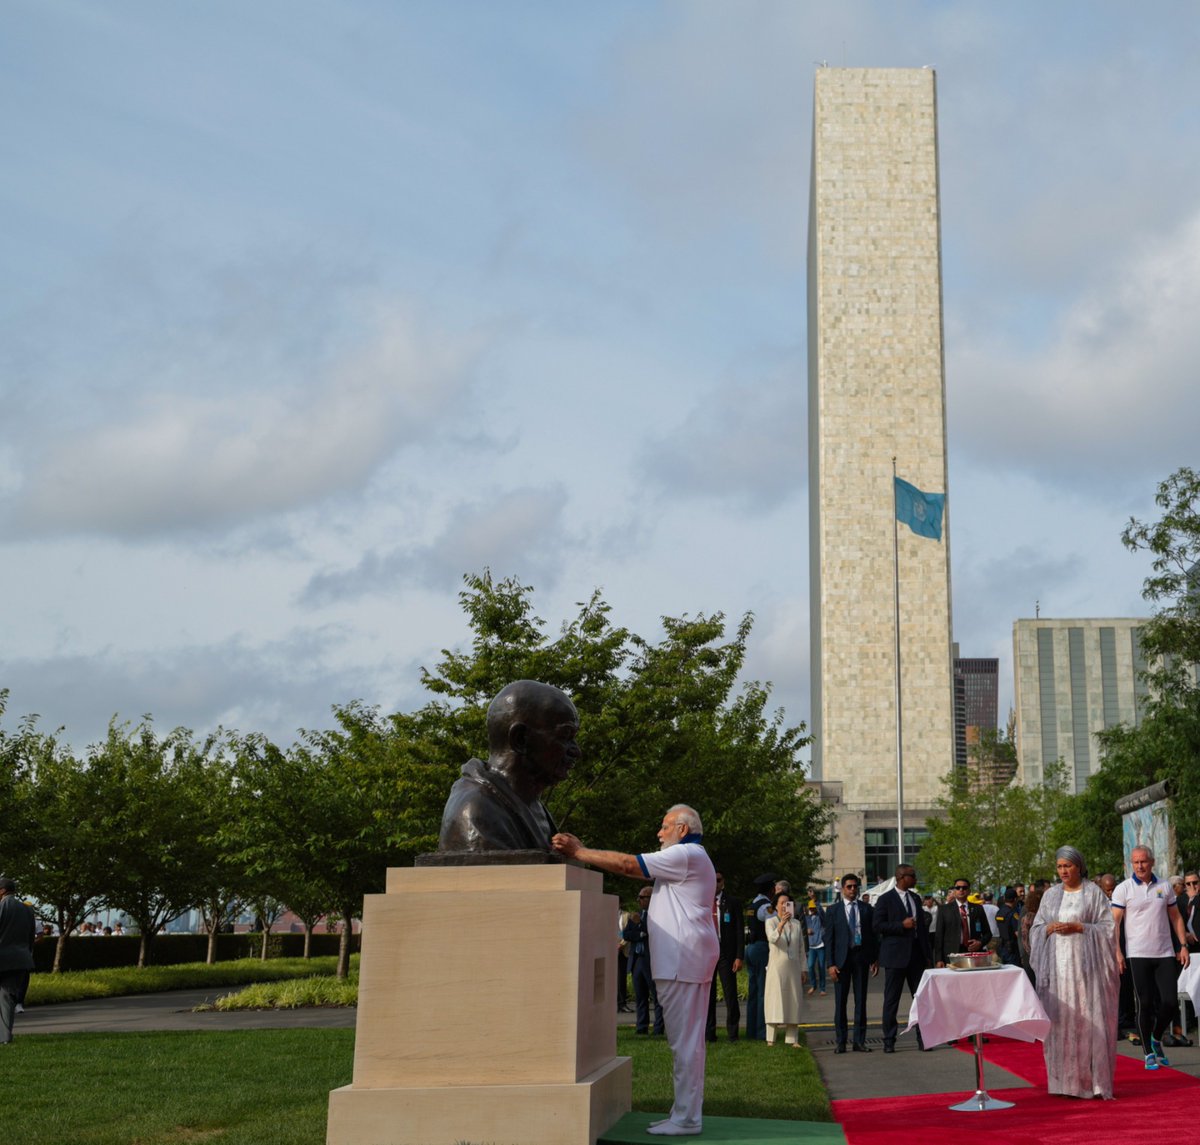 PM @narendramodi paid homage at the bust of Mahatma Gandhi situated in the north lawns of @UN HQ.